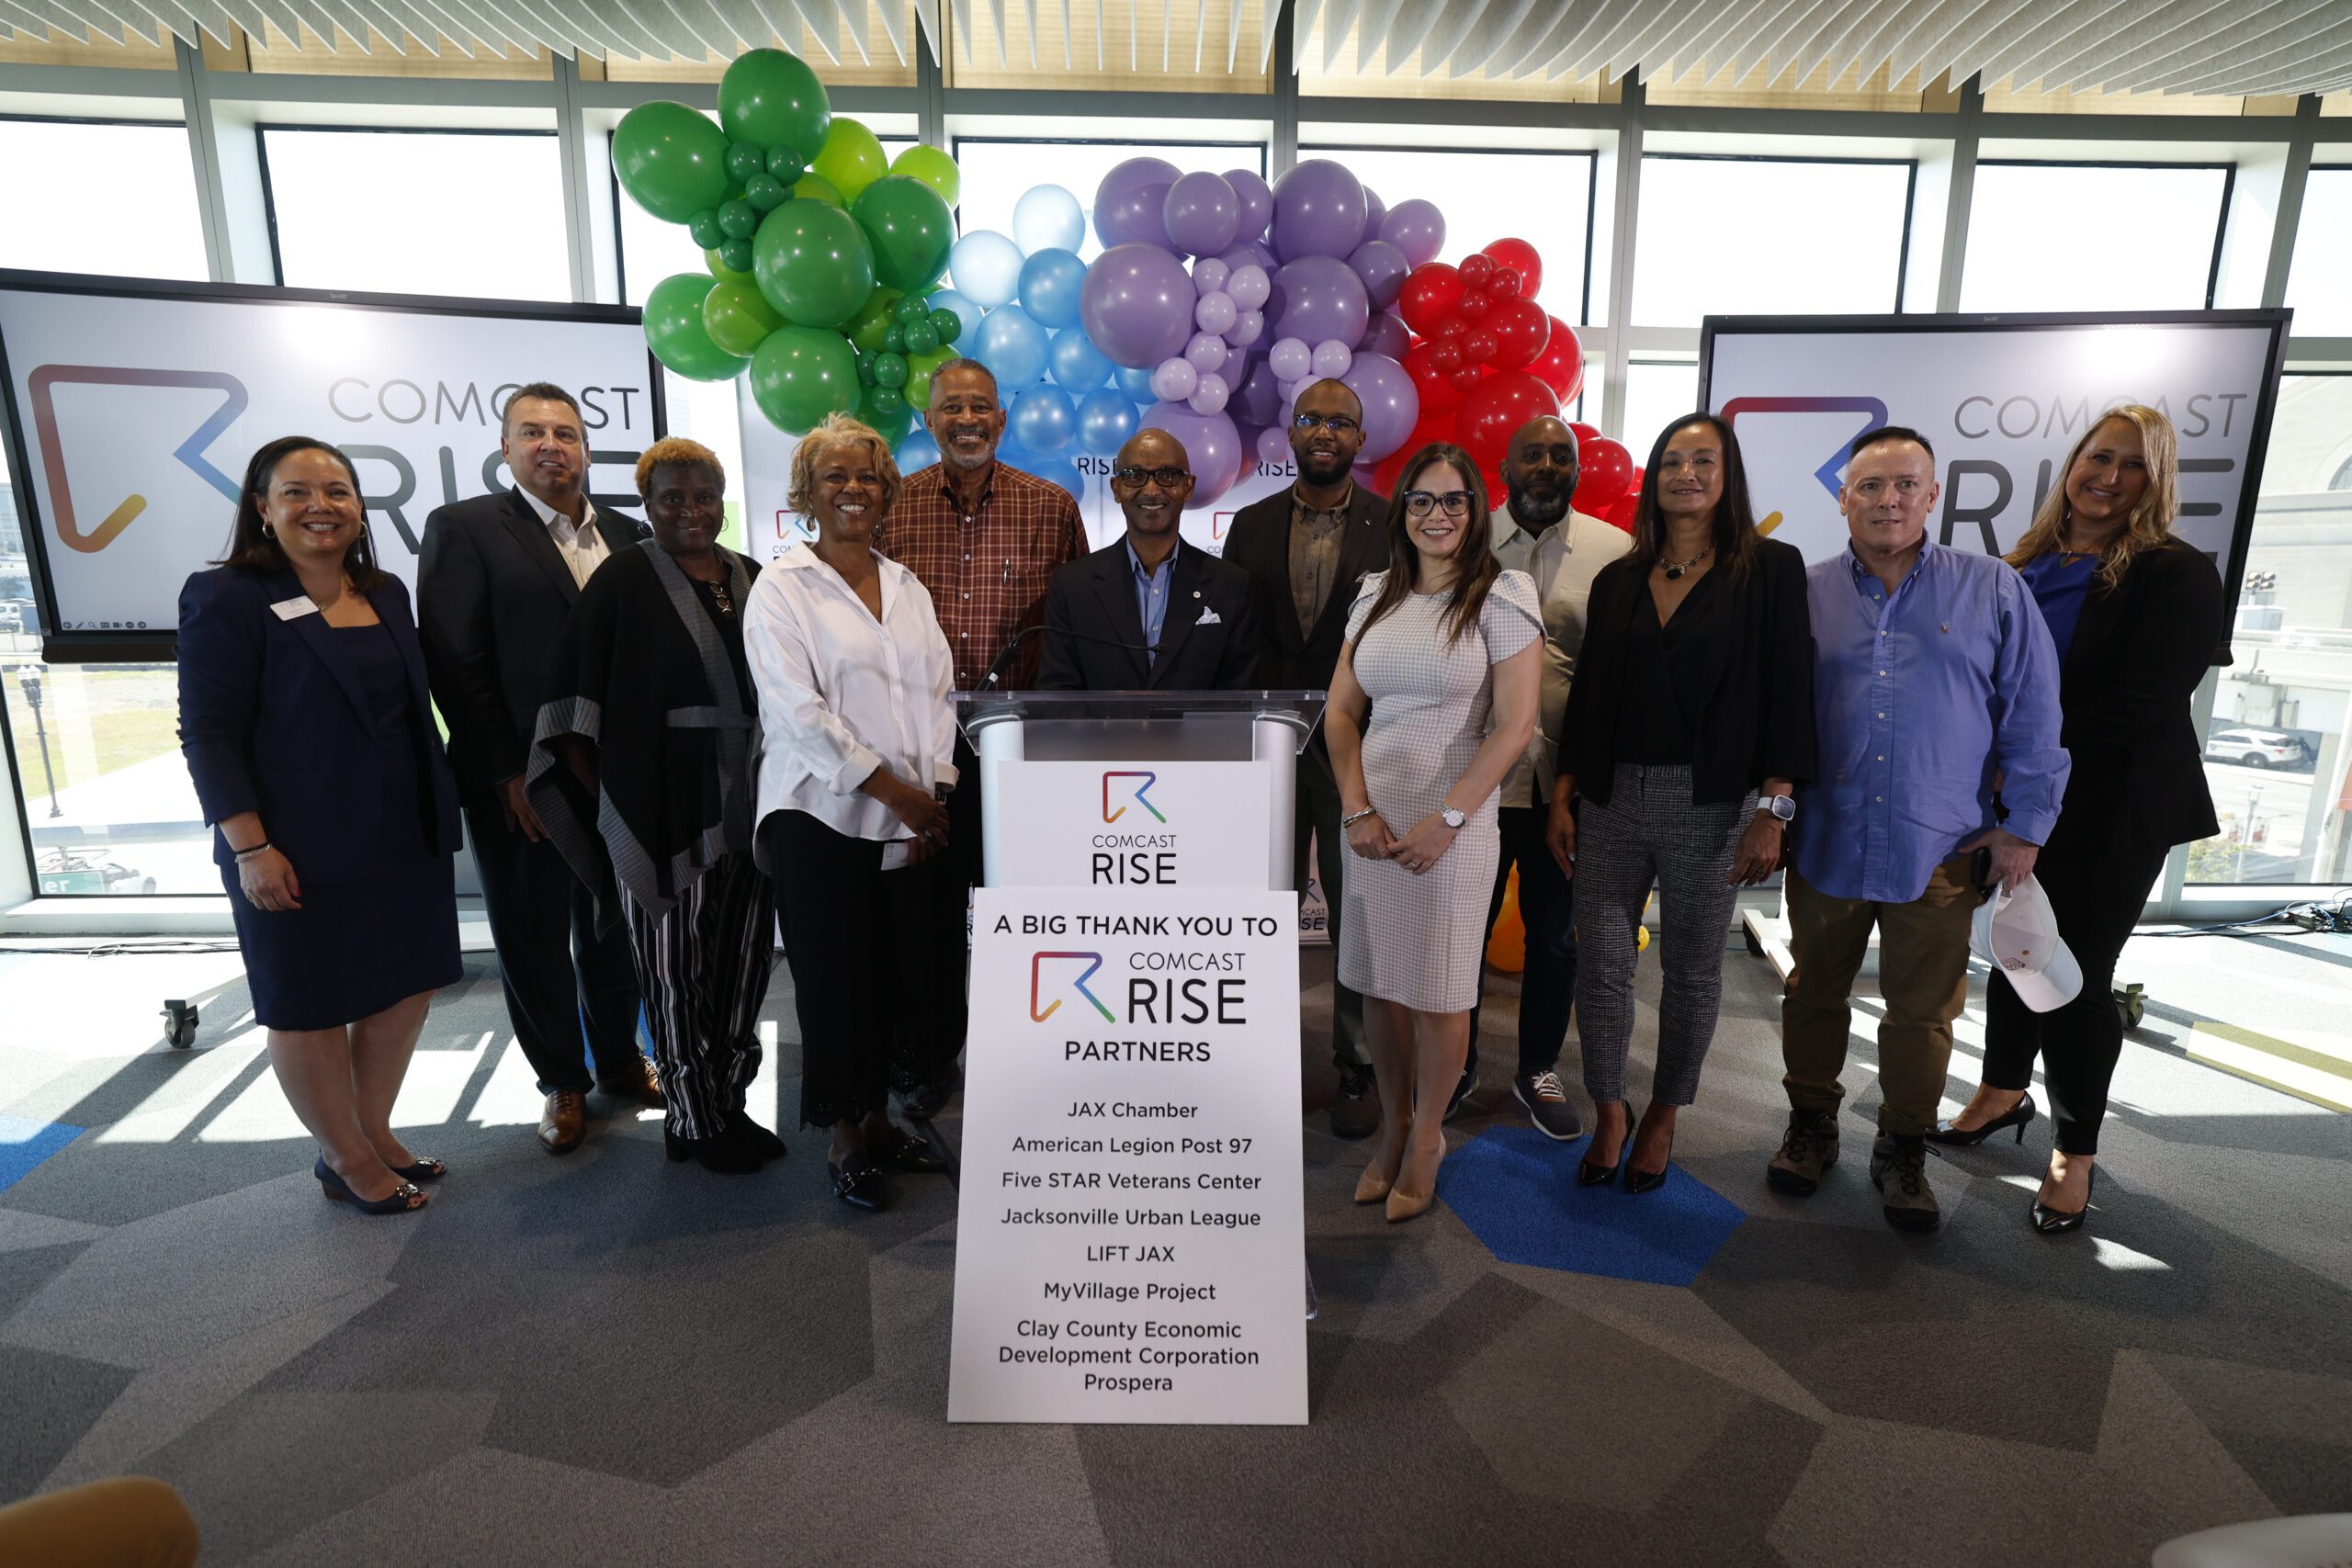 Jacksonville Leaders Celebrate Comcast RISE’s Launch in Florida’s First Coast